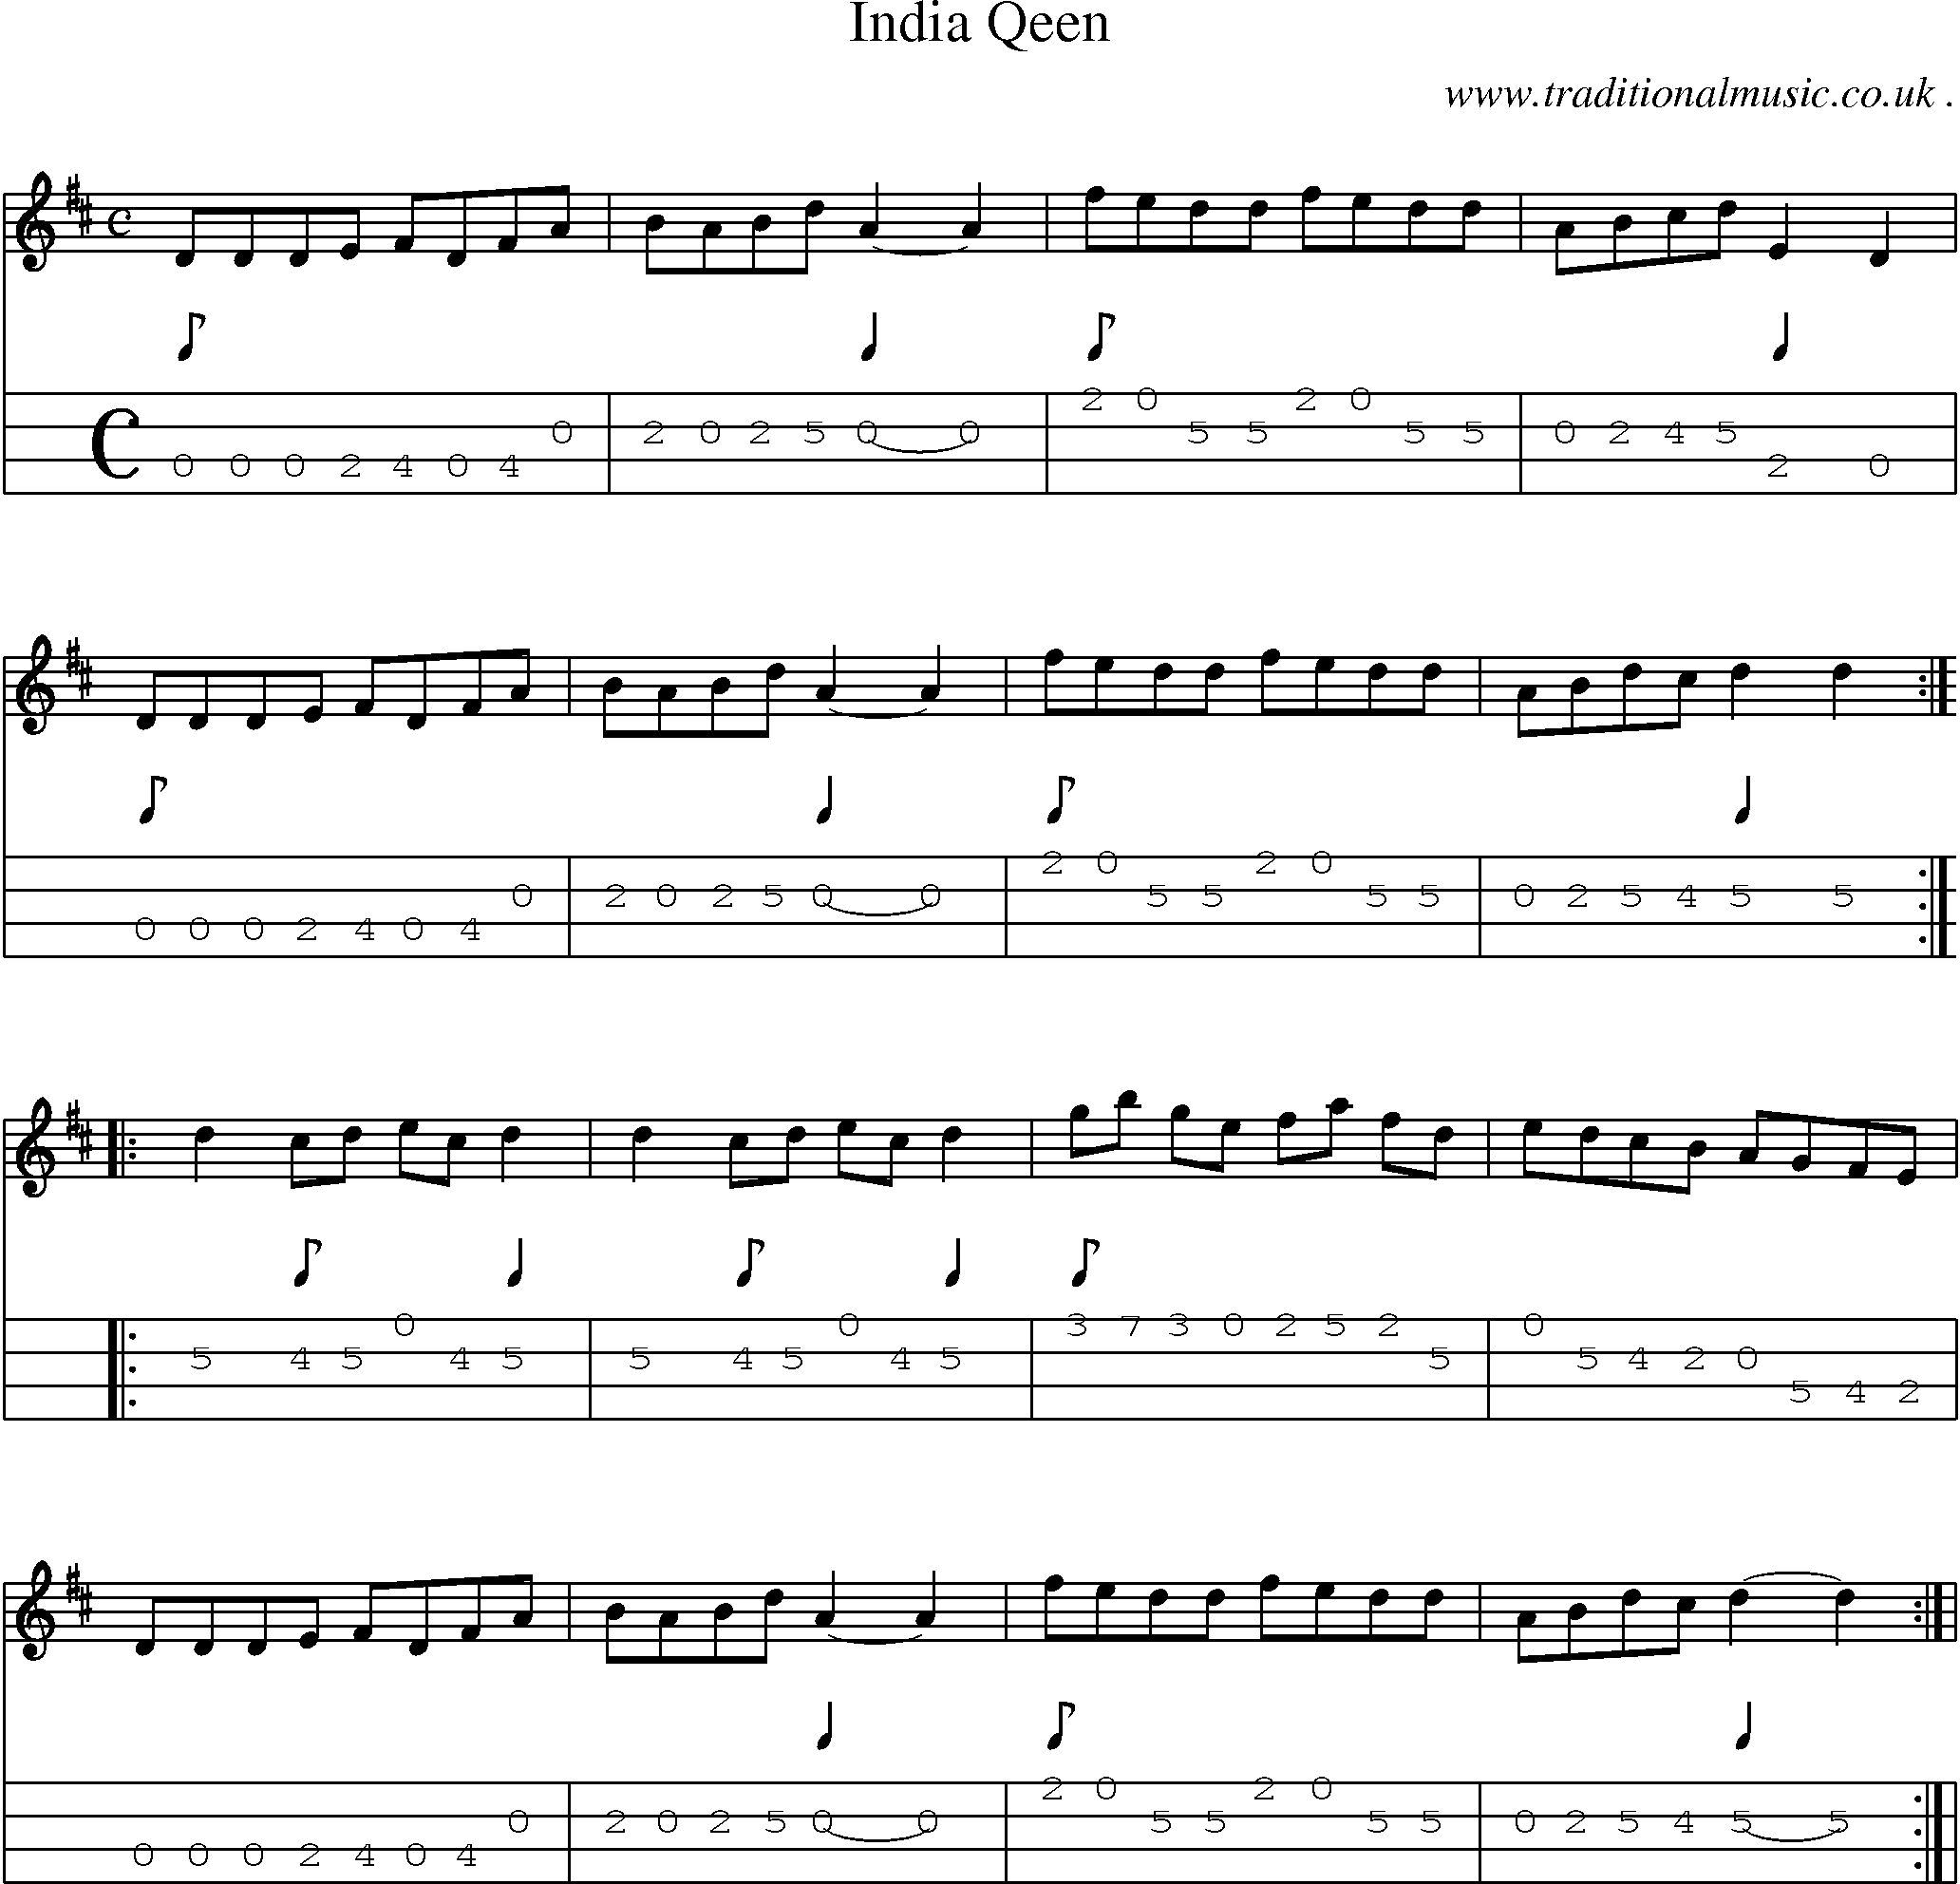 Sheet-Music and Mandolin Tabs for India Qeen